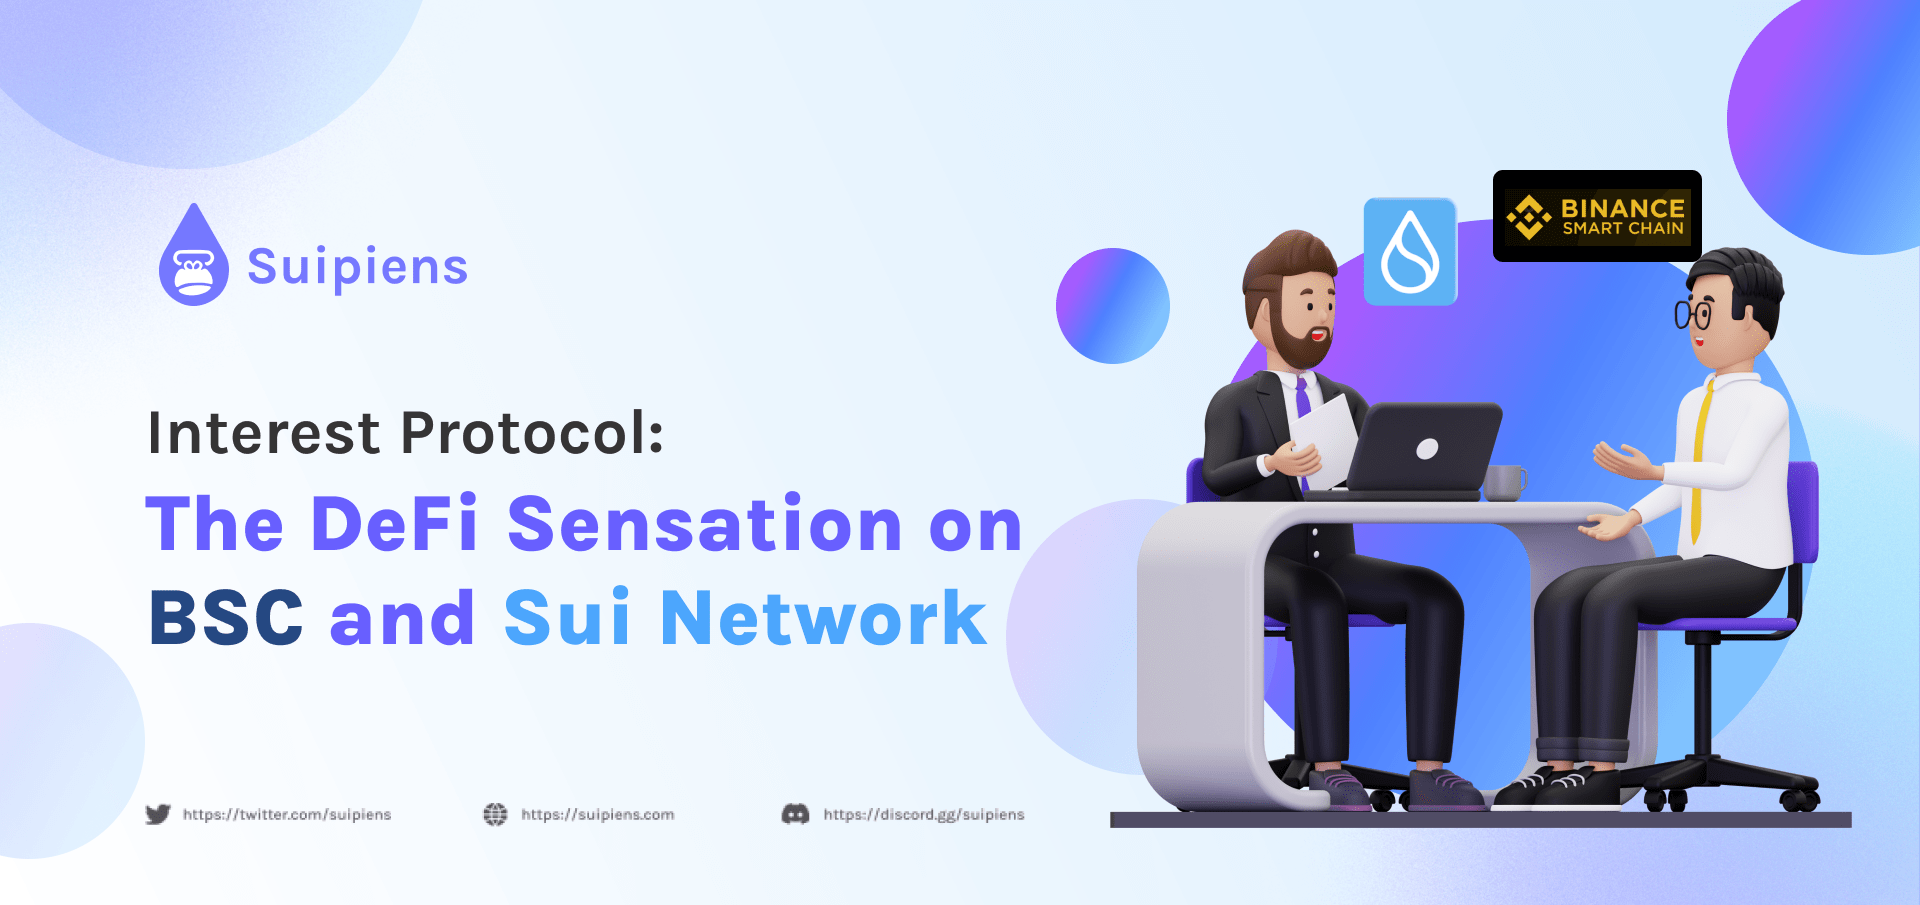 Interest Protocol: The DeFi Sensation on BSC and Sui Network